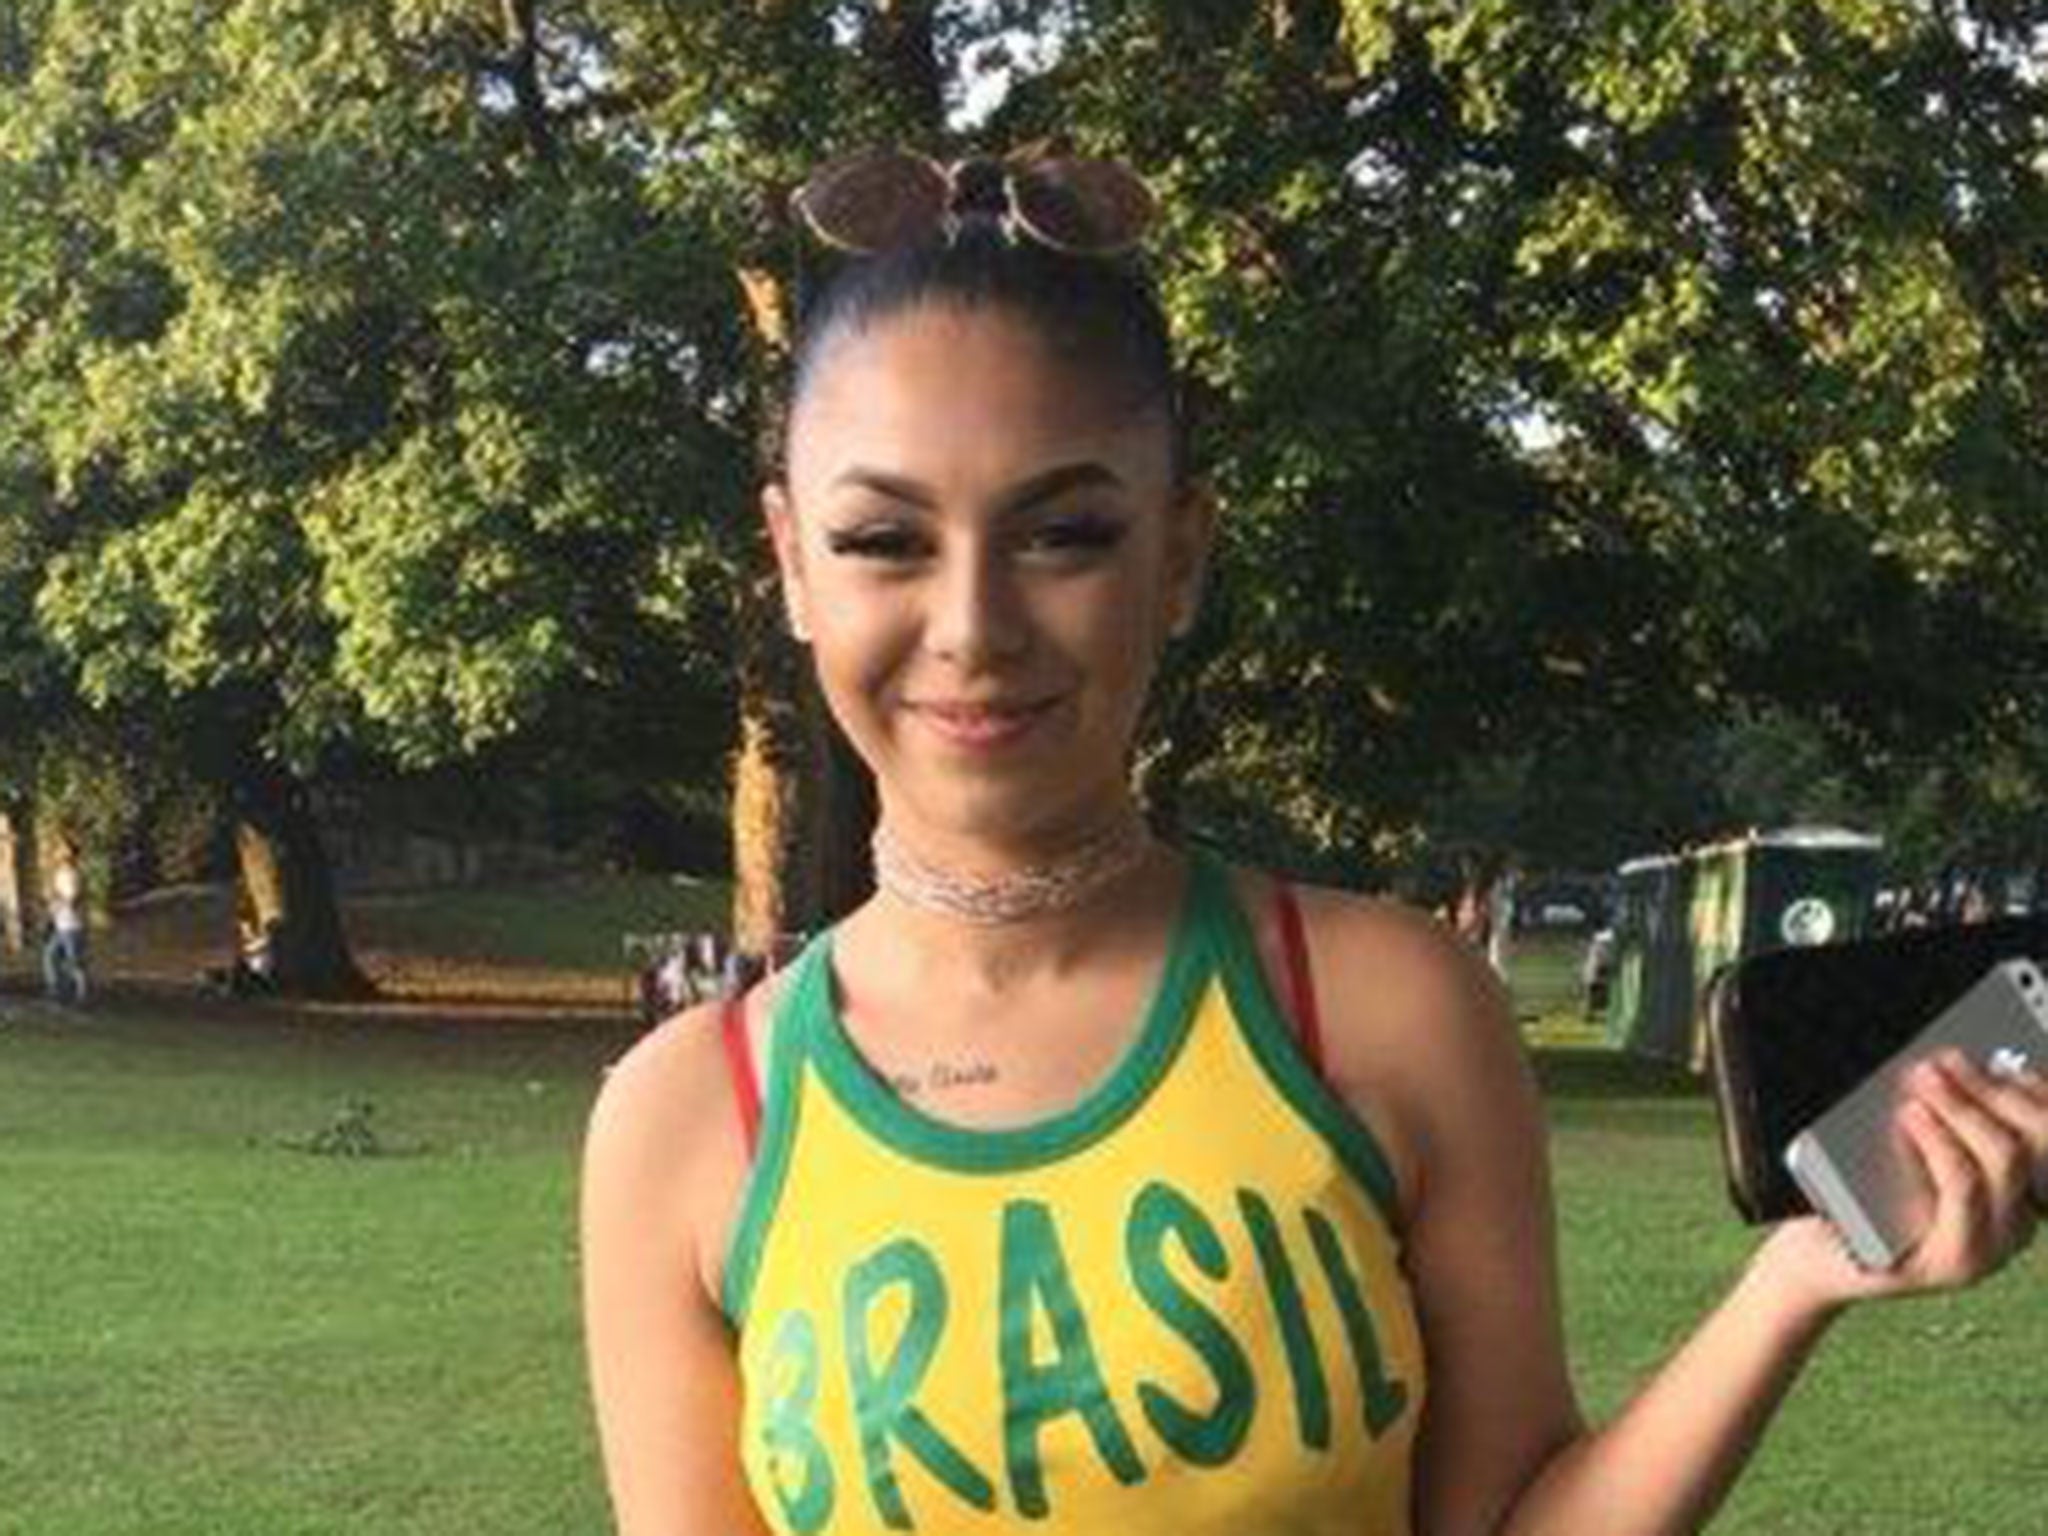 Katrina Makunova, 17, died of a stab wound in Camberwell on 12 July 2018